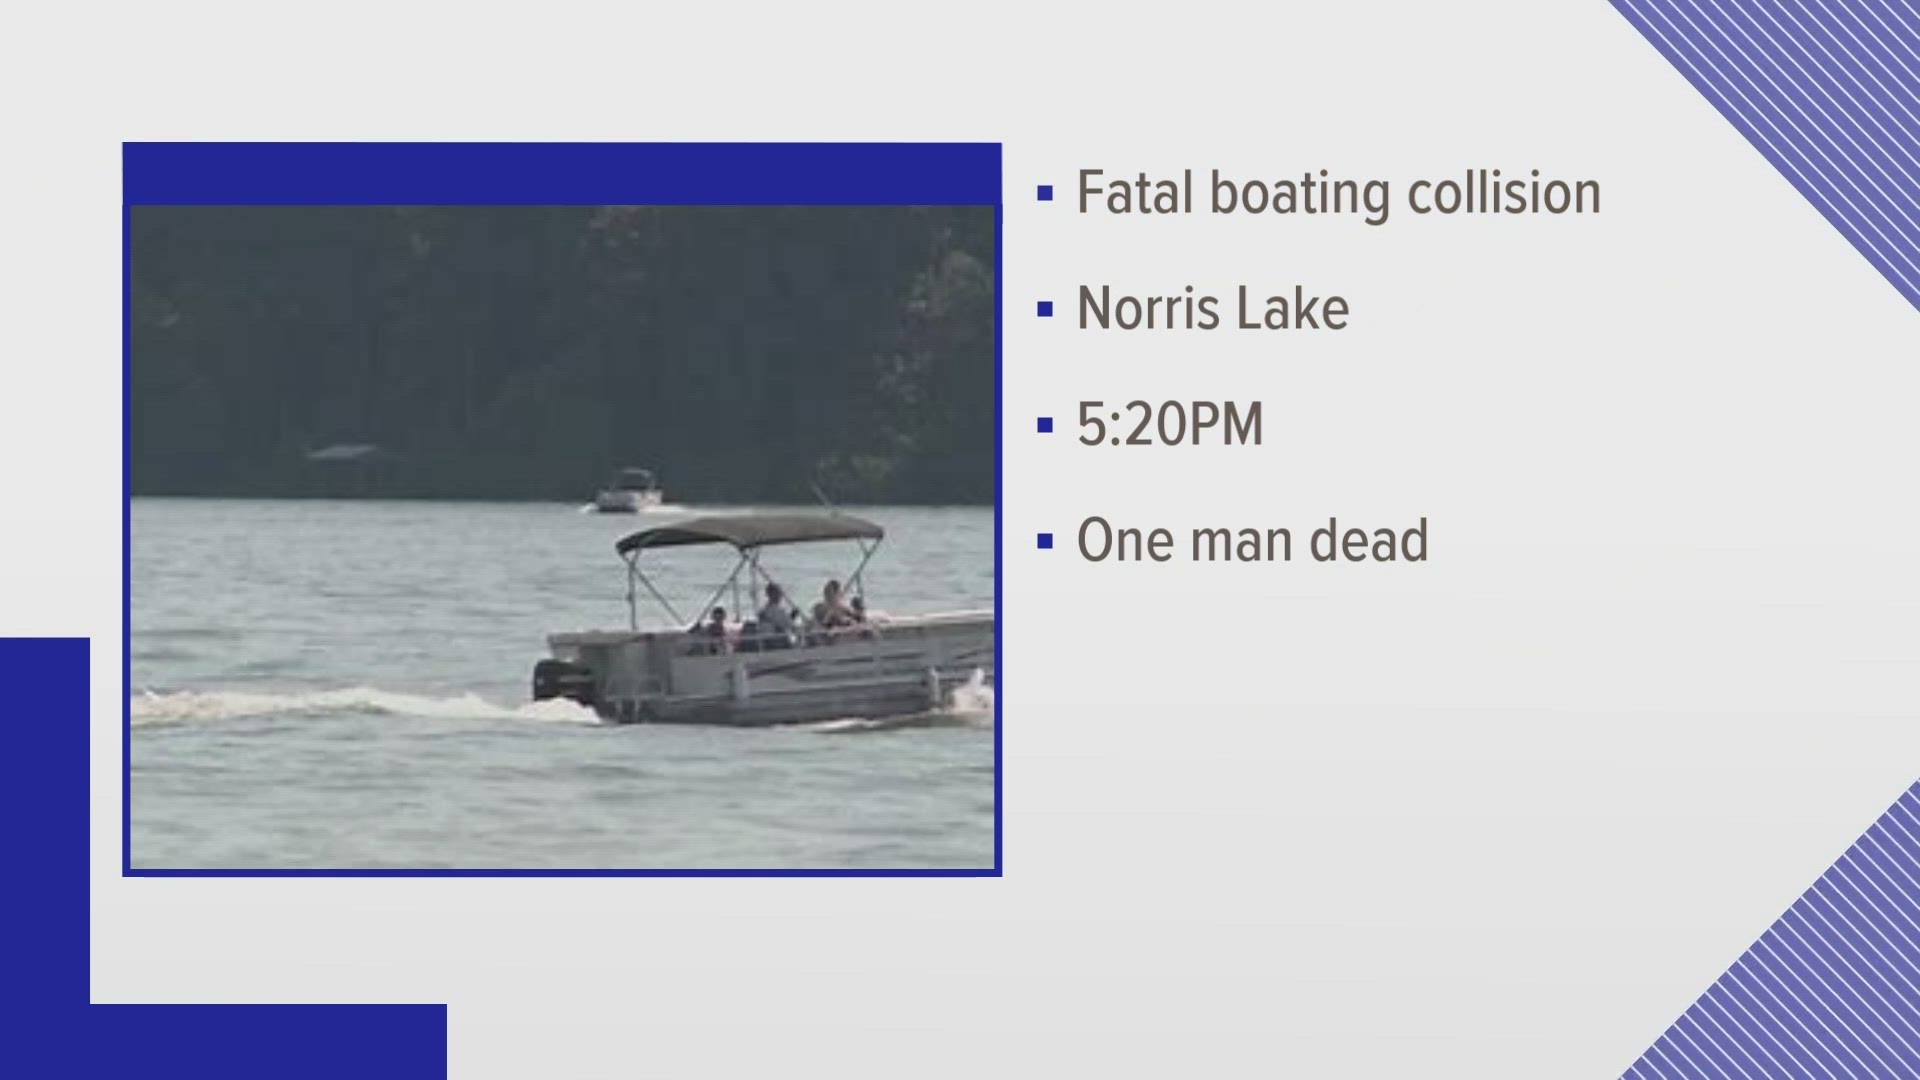 The crash happened around 5:20 p.m. The person operating the personal watercraft died at the scene.